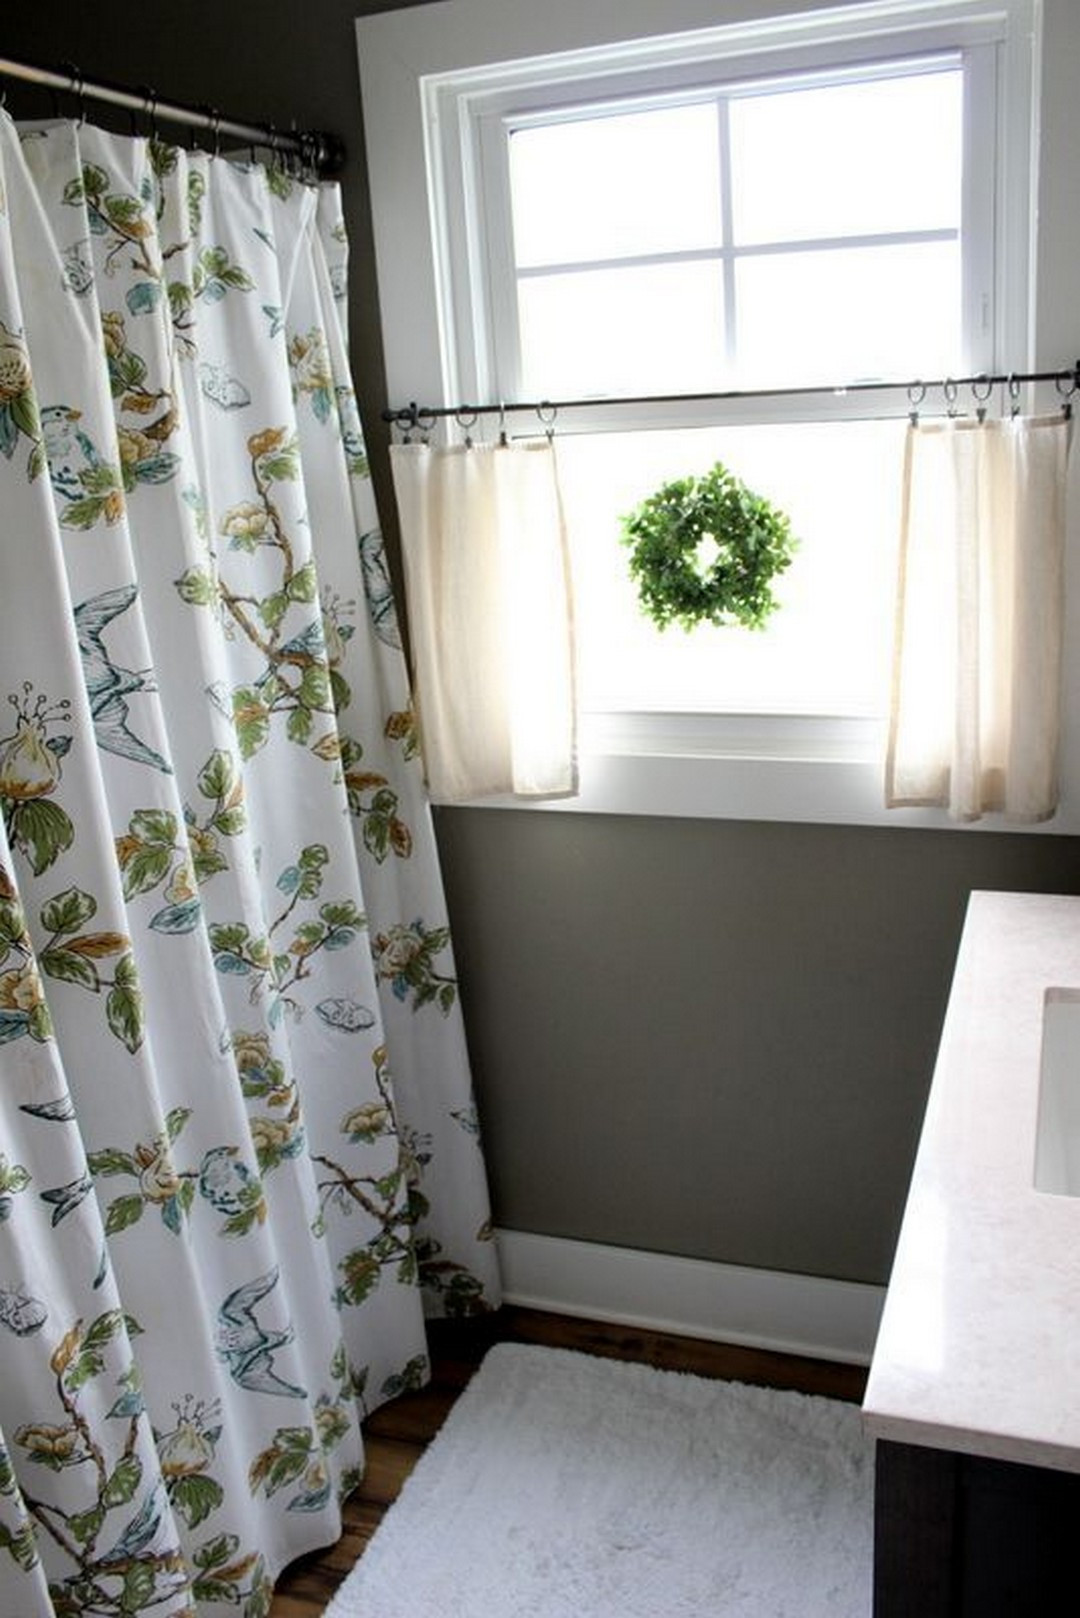 Small Bathroom Window Curtains
 Bathroom Window Covering Ideas Simply You Can Manage on